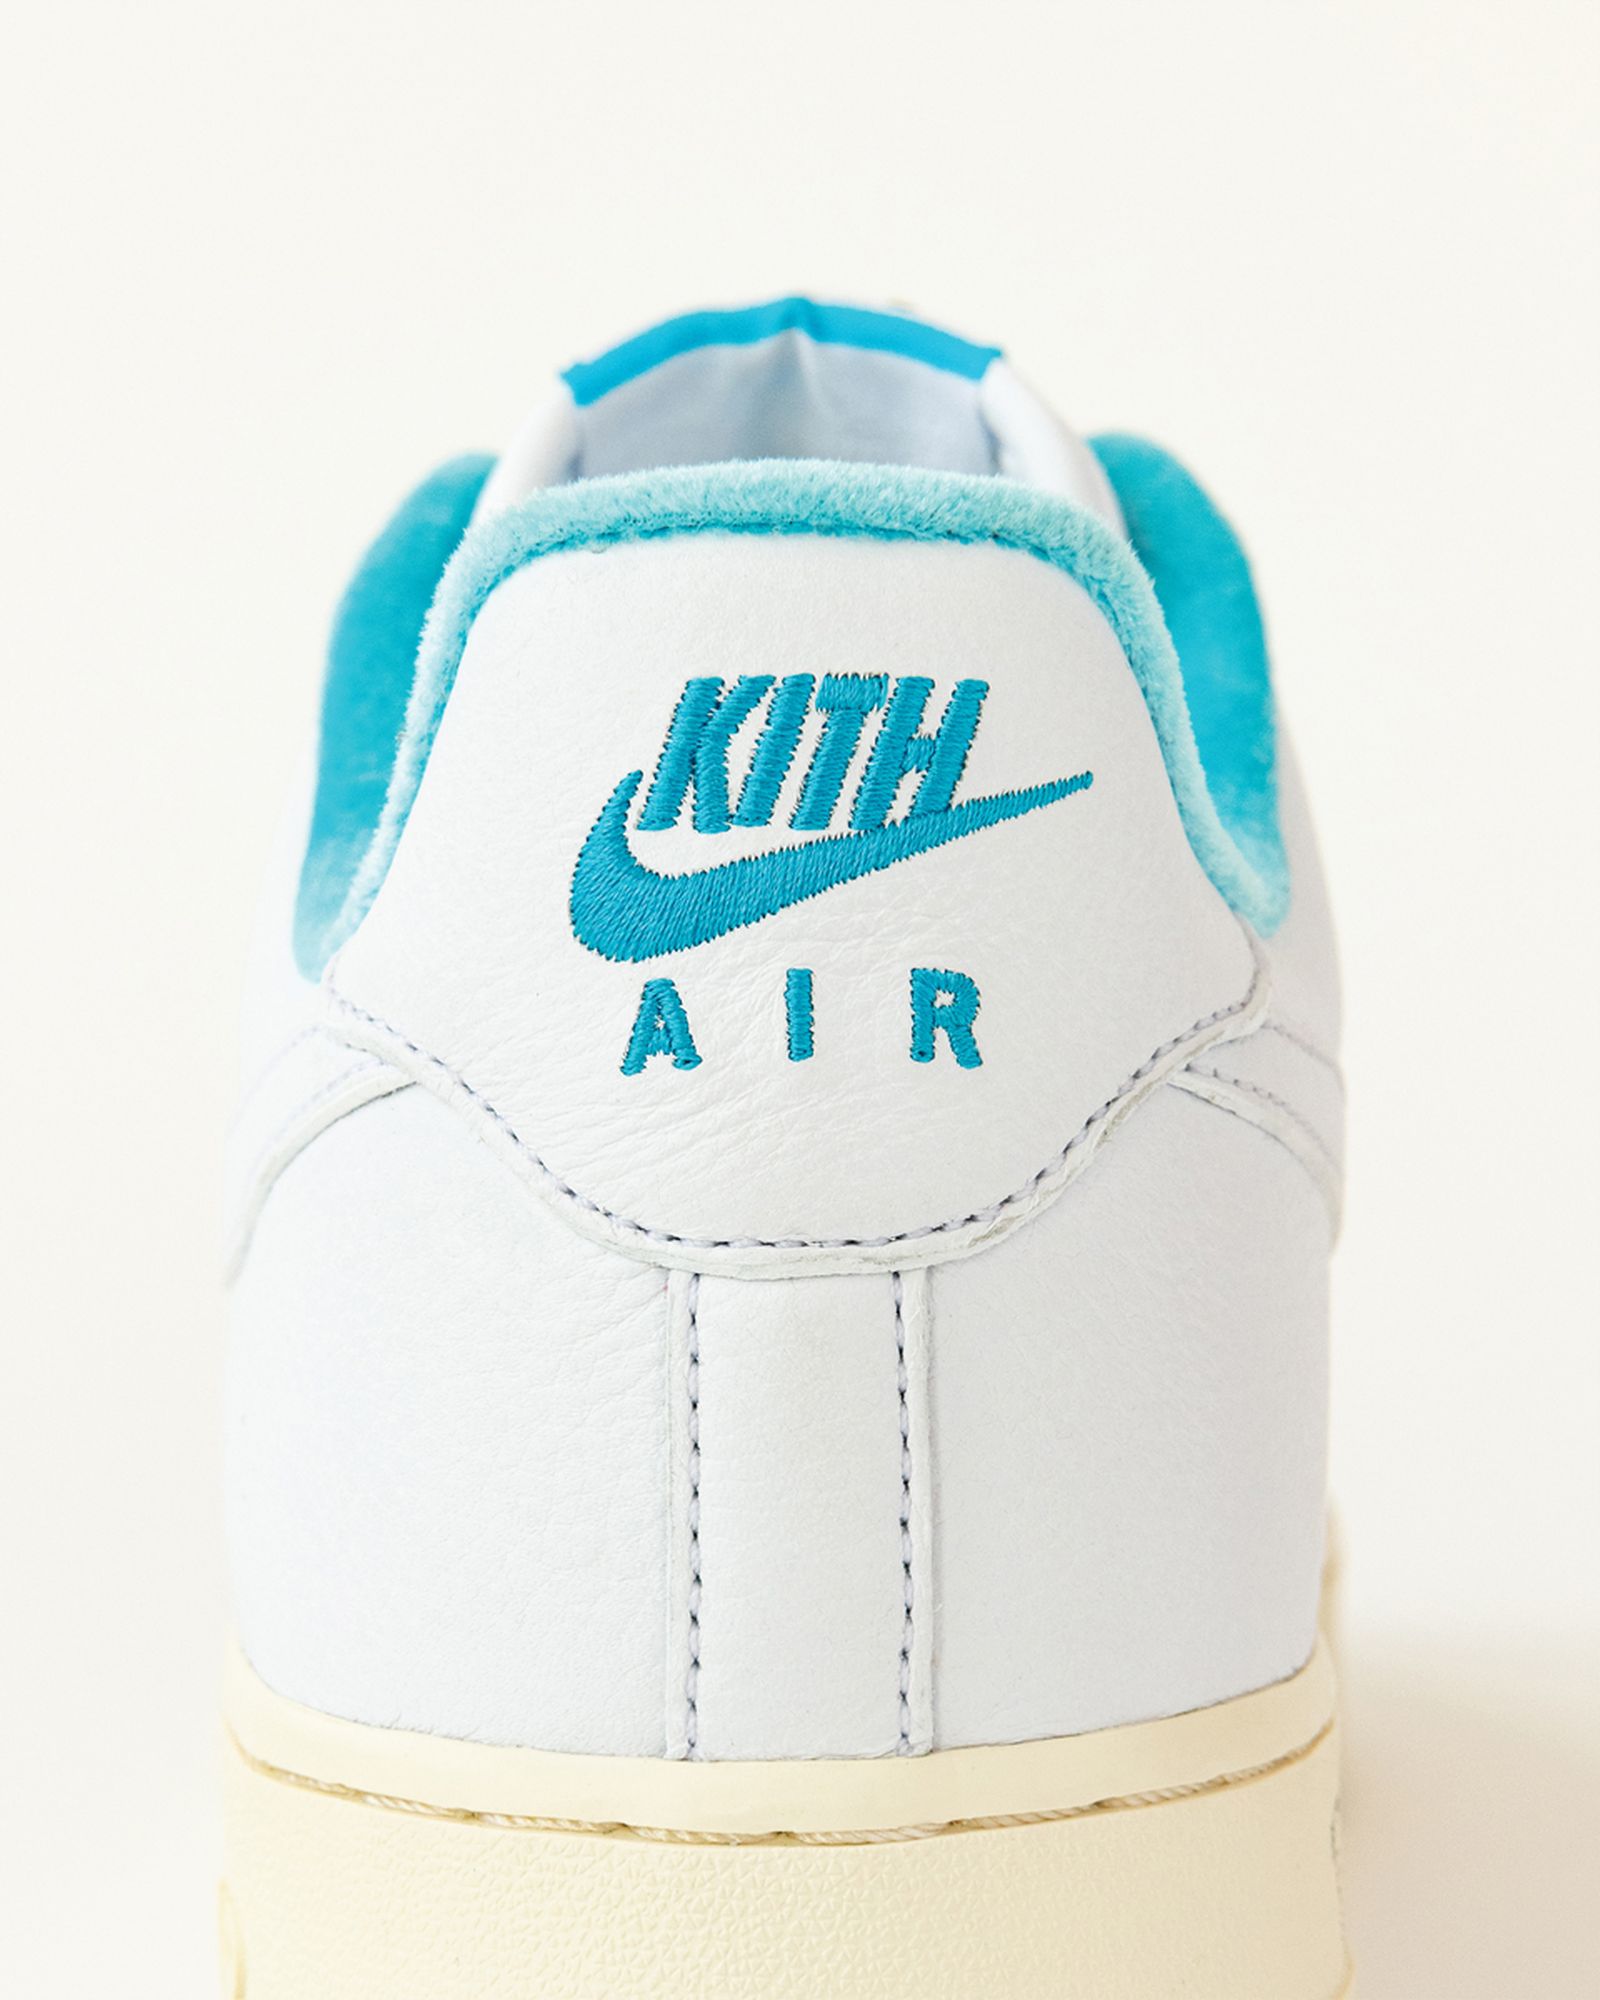 kith nike air force 1 hawaii collaboration exclusive sneaker release date info price